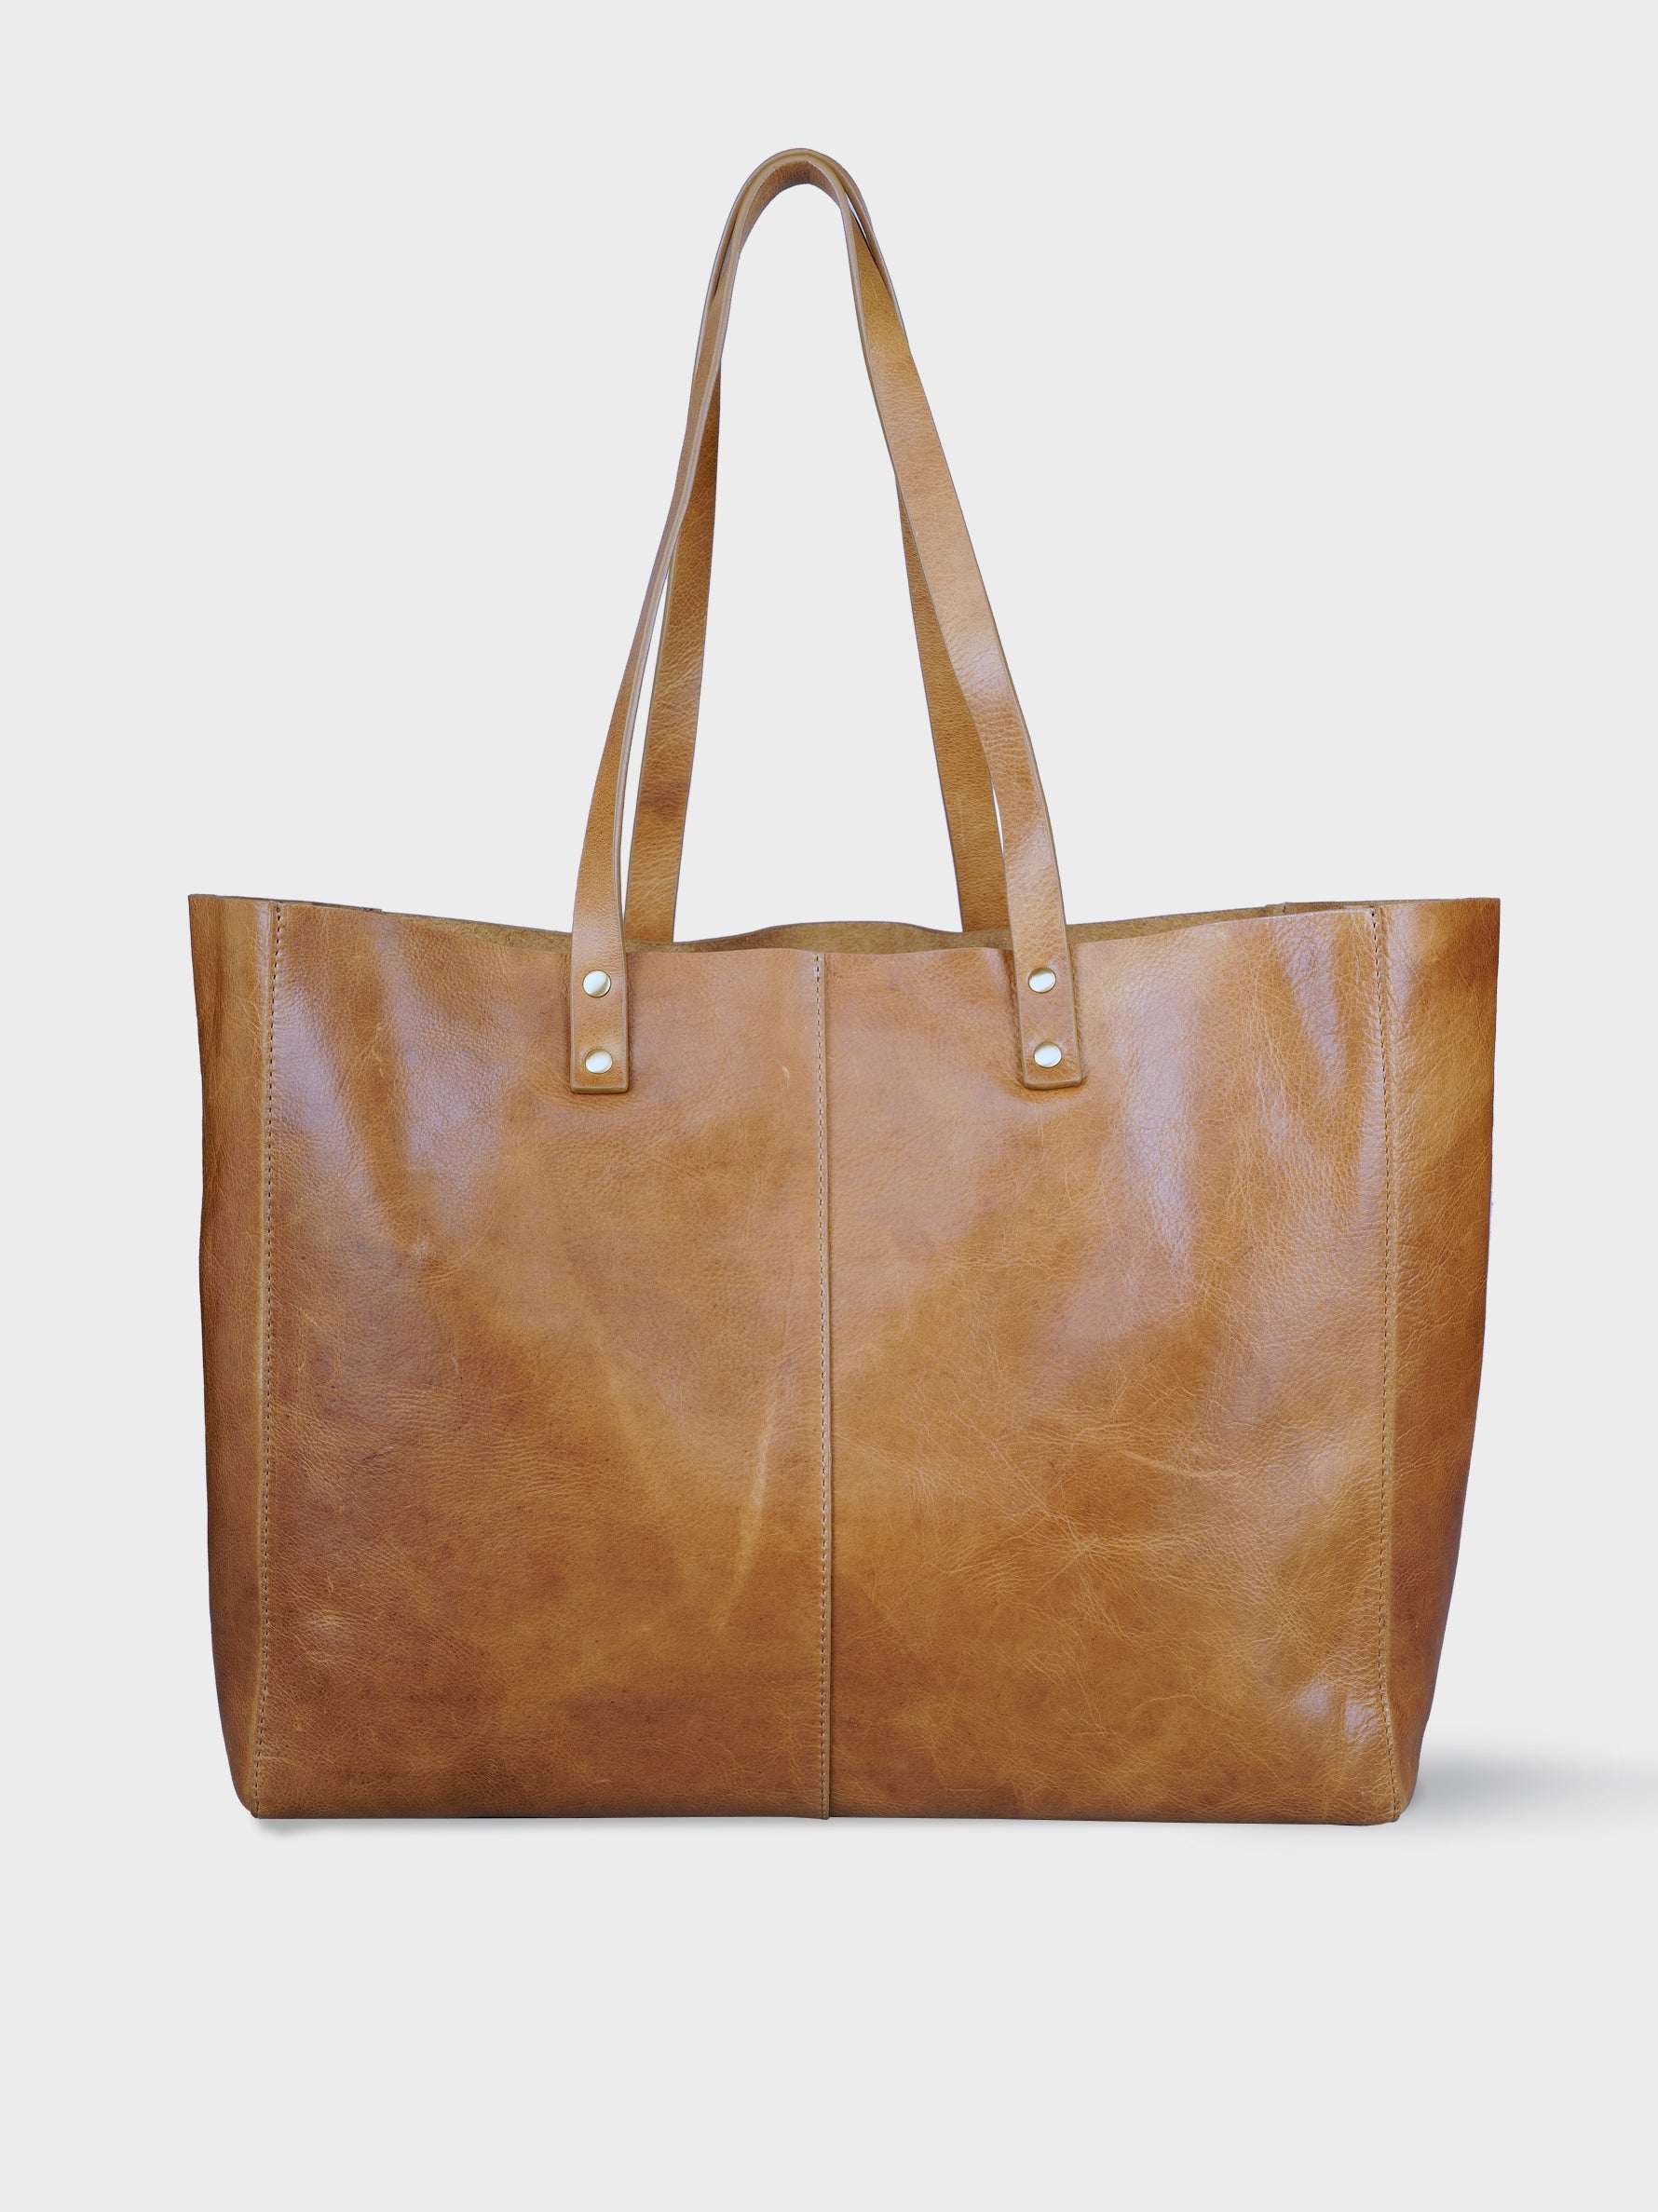 Handcrafted Genuine Vegetable Tanned Leather Old Fashioned Tote Large Tuscany Tan for Women Tan & Loom